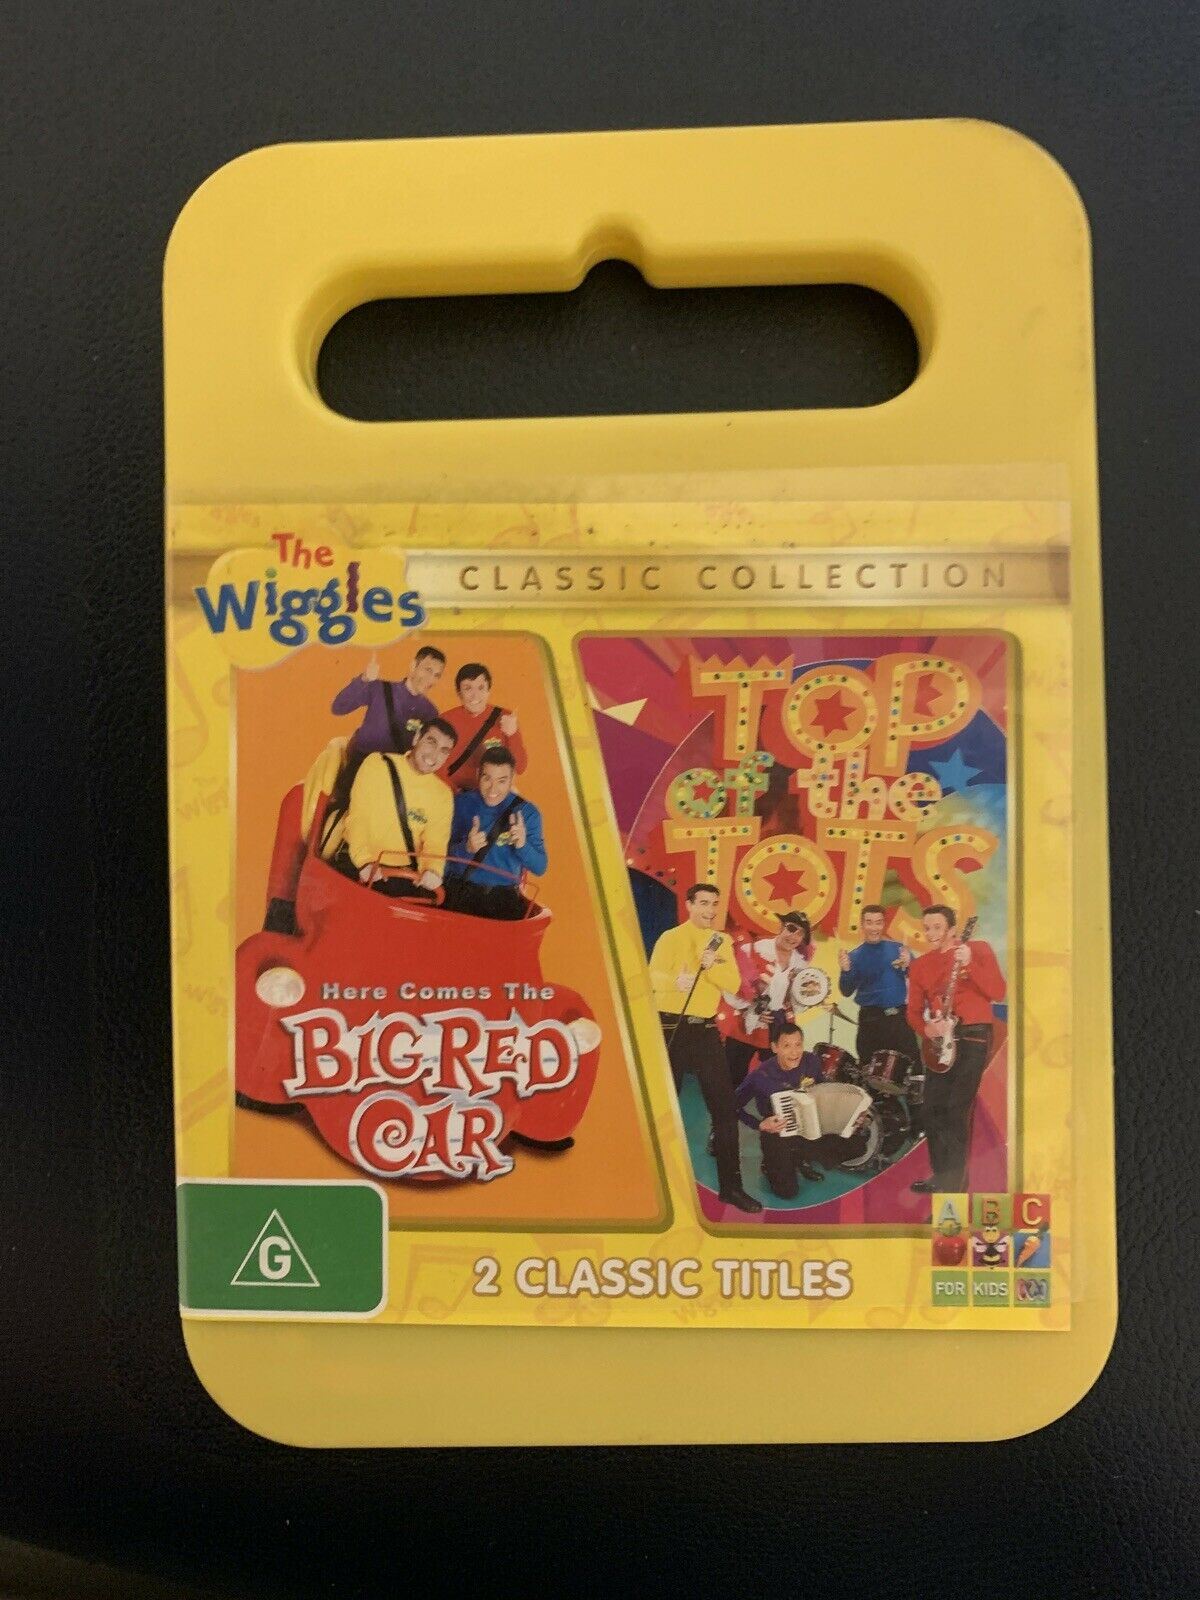 The Wiggles - Here Comes The Big Red Car / Top Of The Tots DVD Region 4